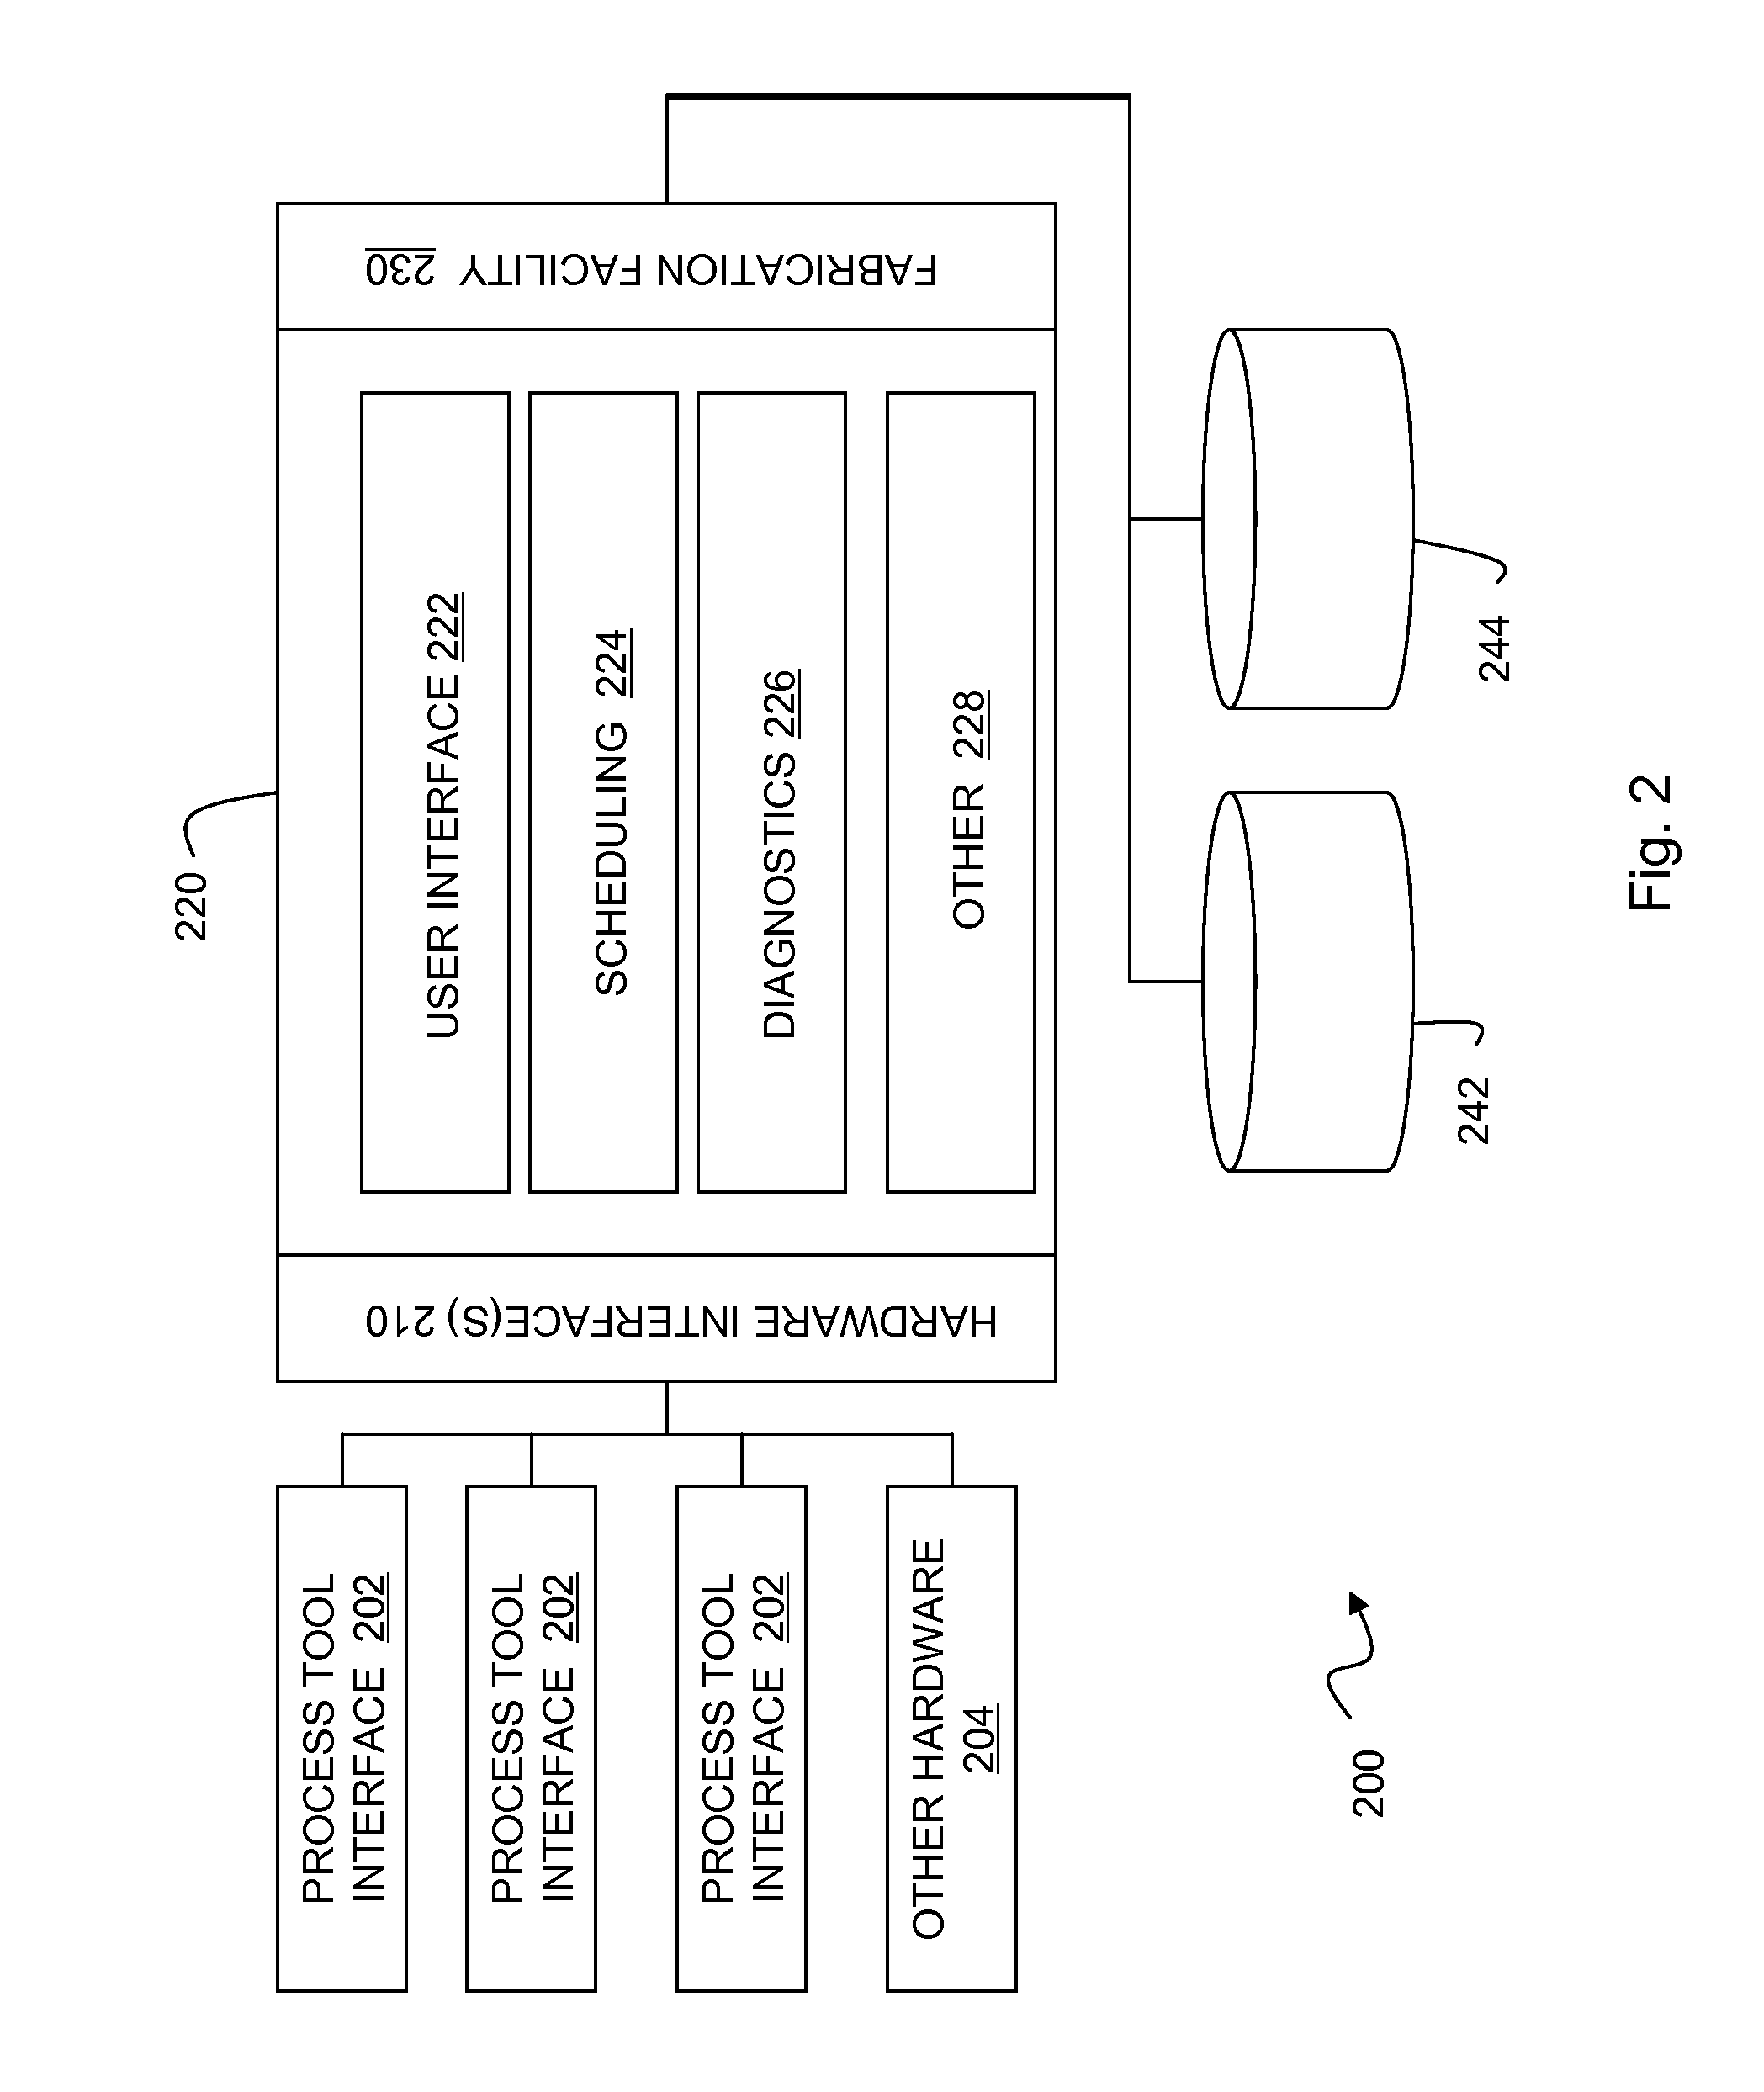 Methods and systems for controlling a semiconductor fabrication process